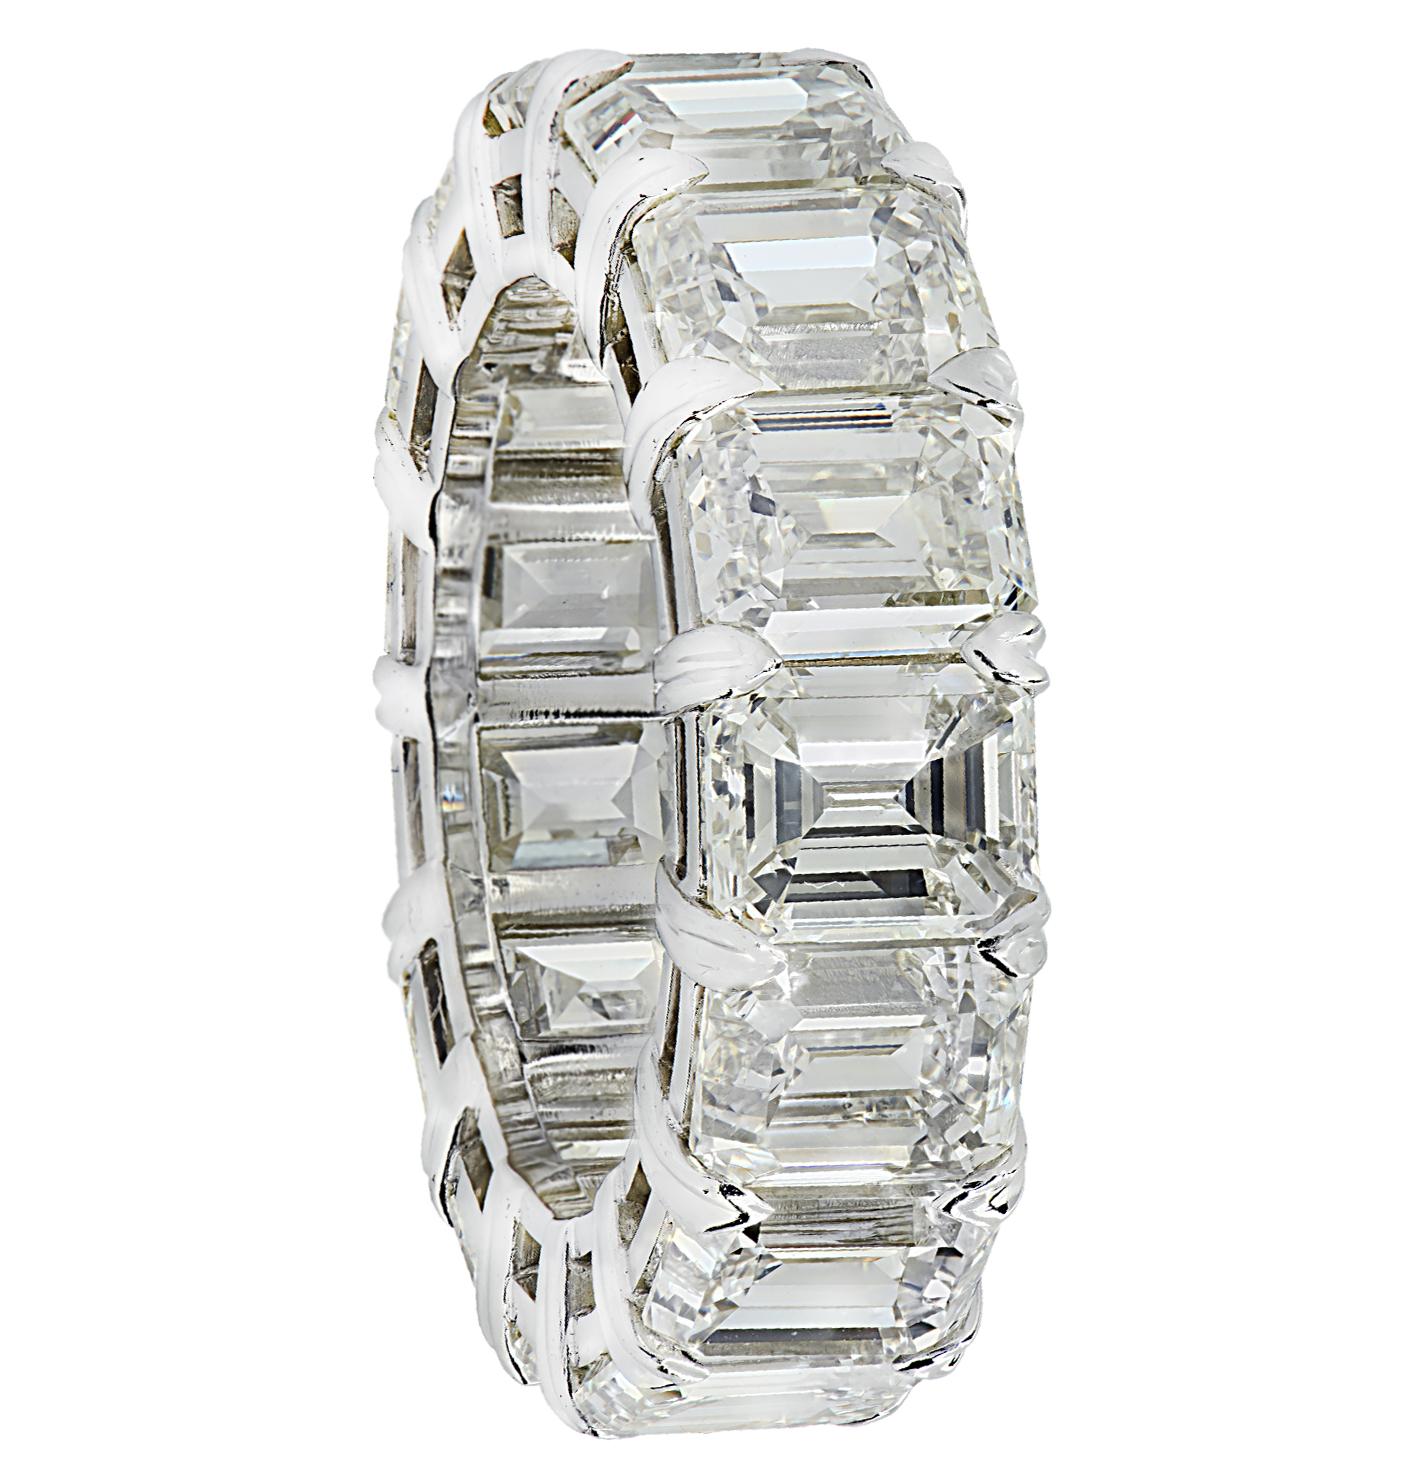 Exquisite Vivid Diamonds Emerald cut diamond eternity band crafted in Platinum, showcasing 15 stunning emerald cut diamonds weighing 15.2 carats total, J color, VVS1-VS clarity. Each diamond was carefully selected, perfectly matched, and set in a